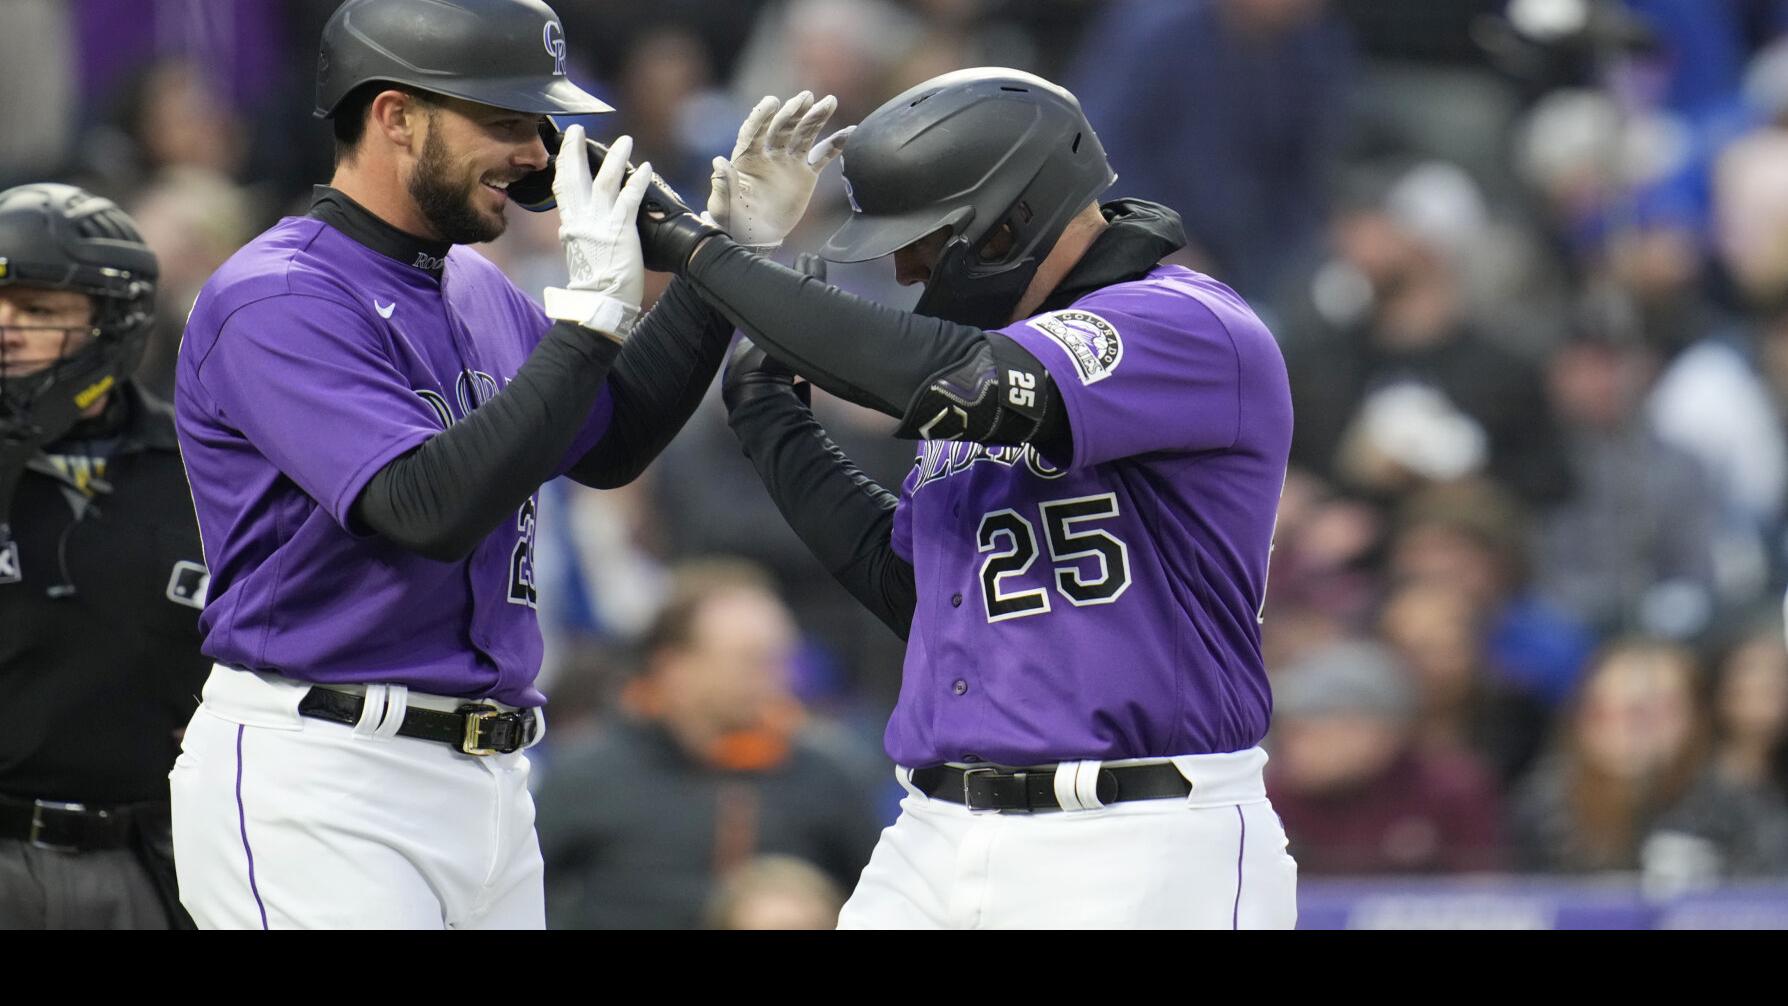 C.J. Cron launches two home runs as the Rockies' beat the Cubs 9-6